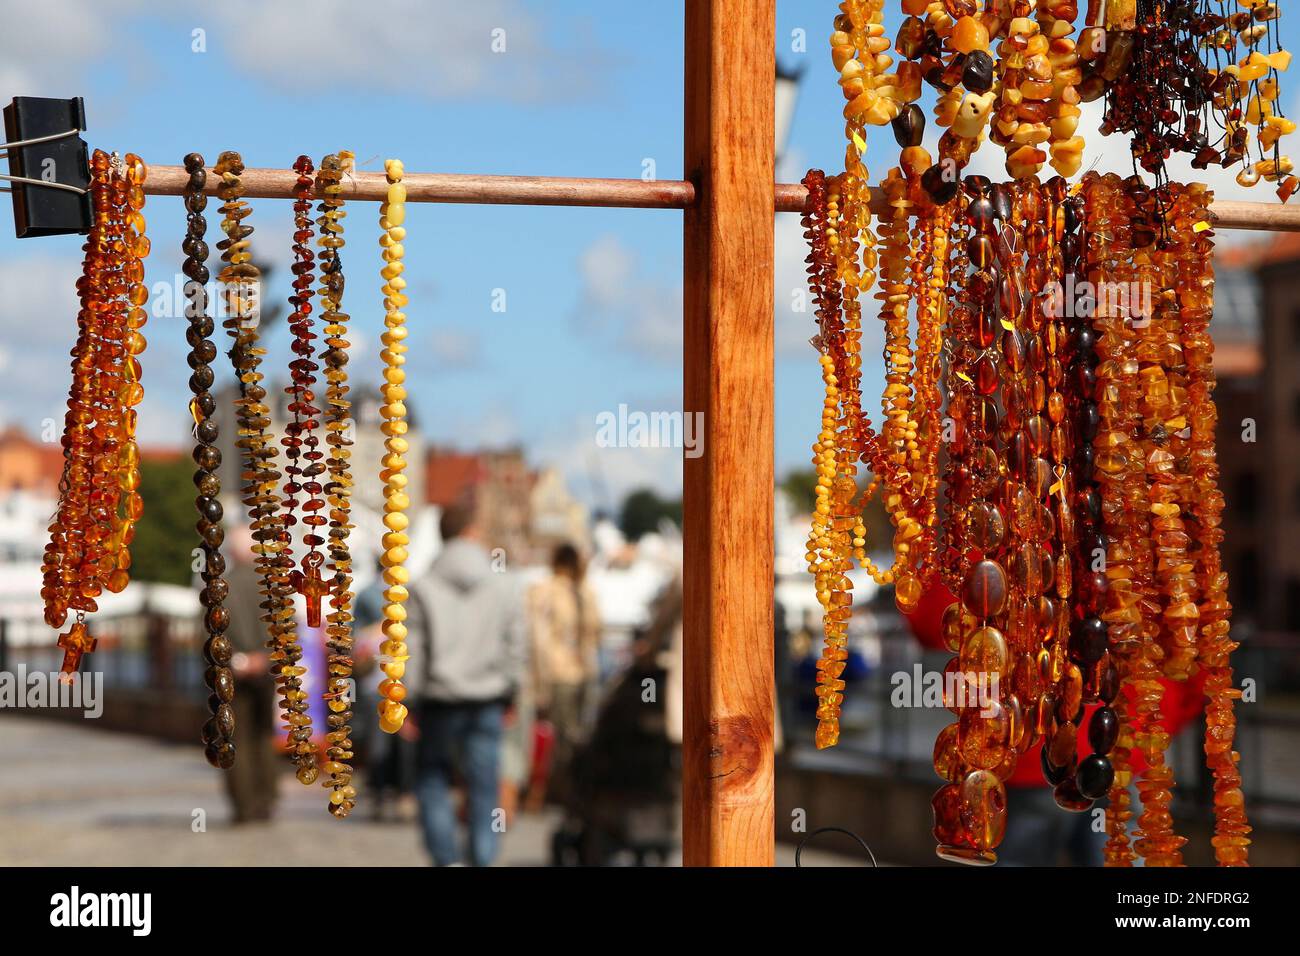 Amber necklaces in souvenir store in Gdansk, Poland. Baltic amber is a typical product from North Poland. Stock Photo